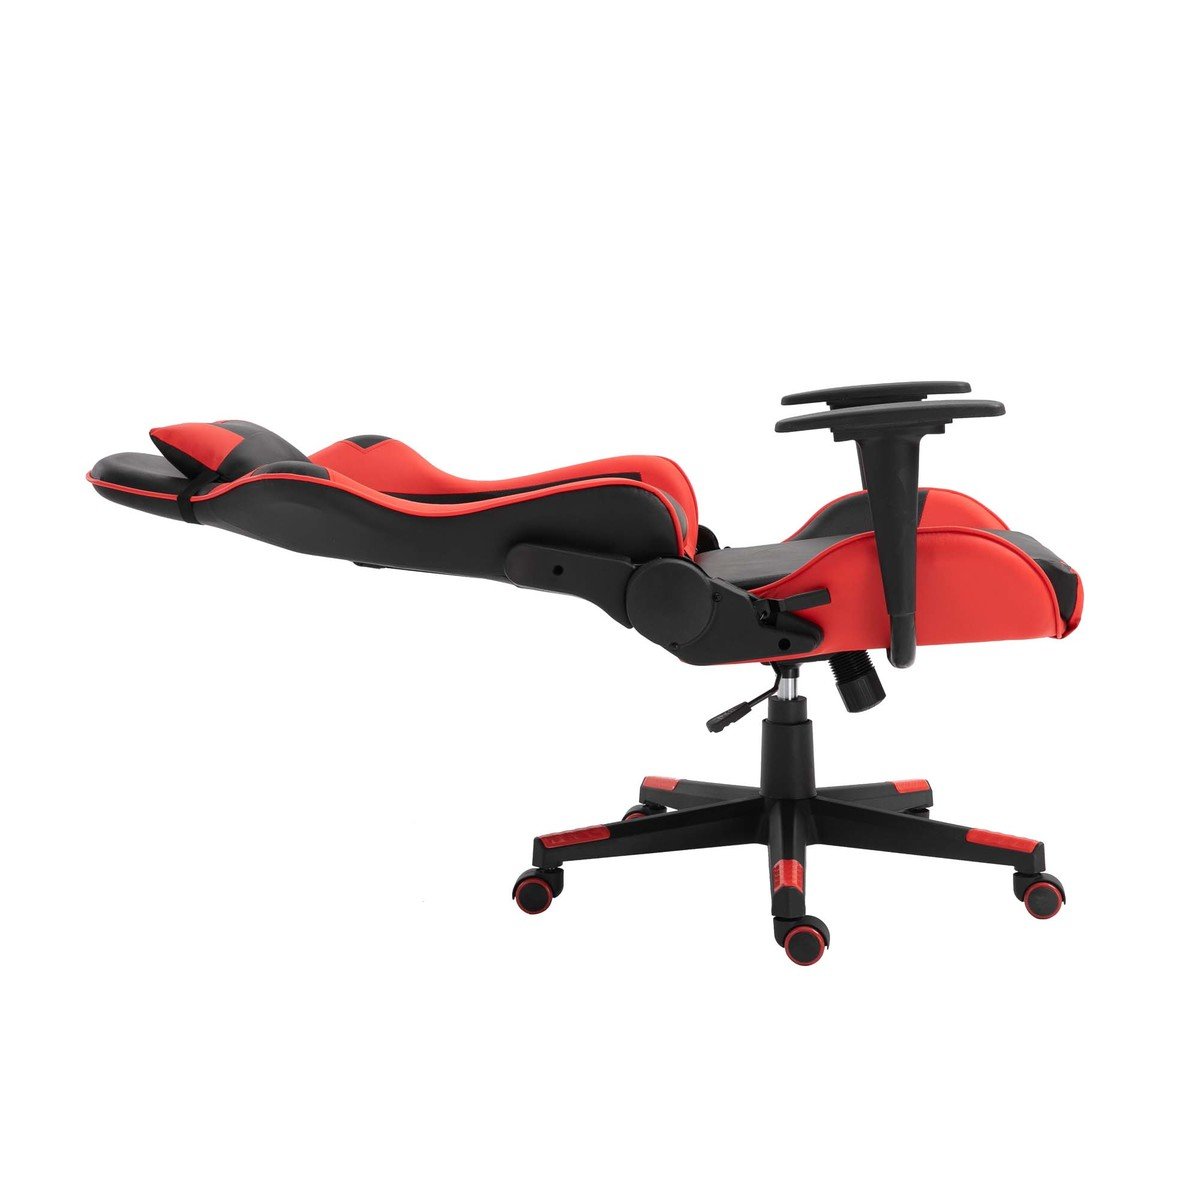 Maple Leaf Gaming Chair Red